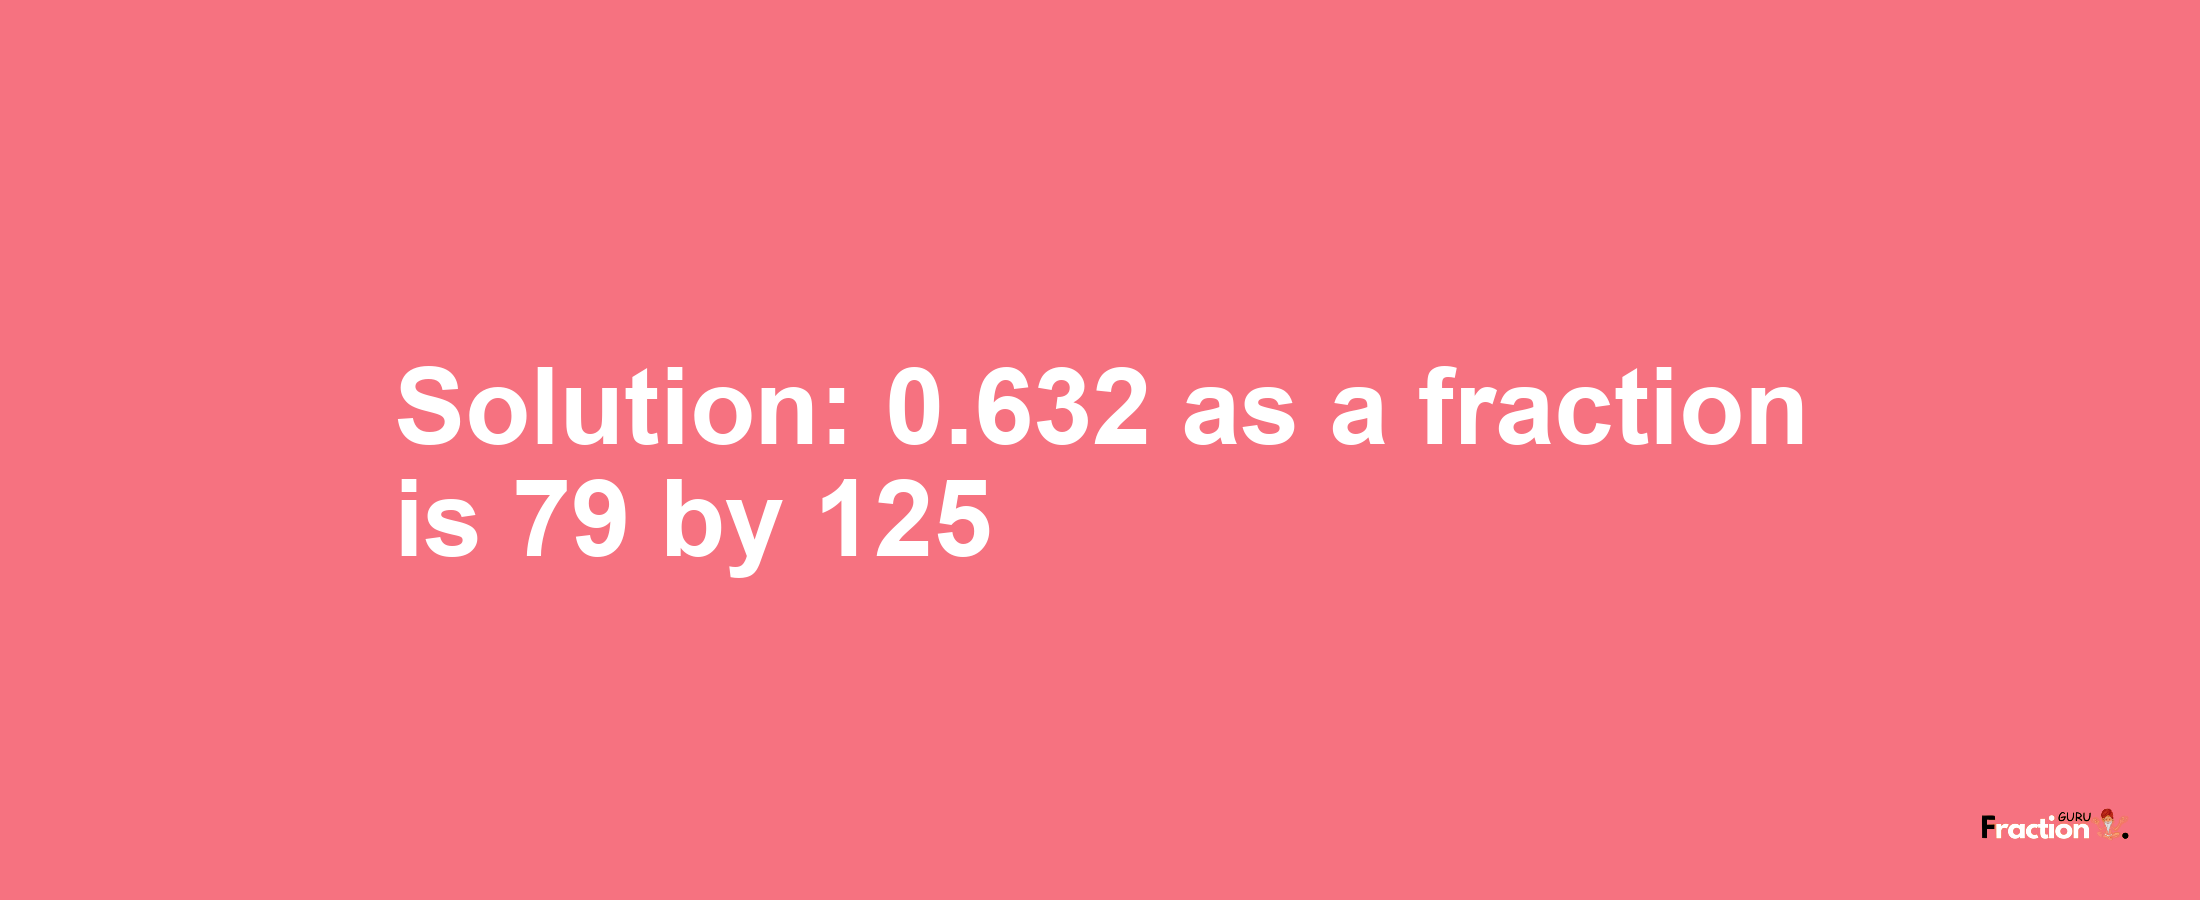 Solution:0.632 as a fraction is 79/125